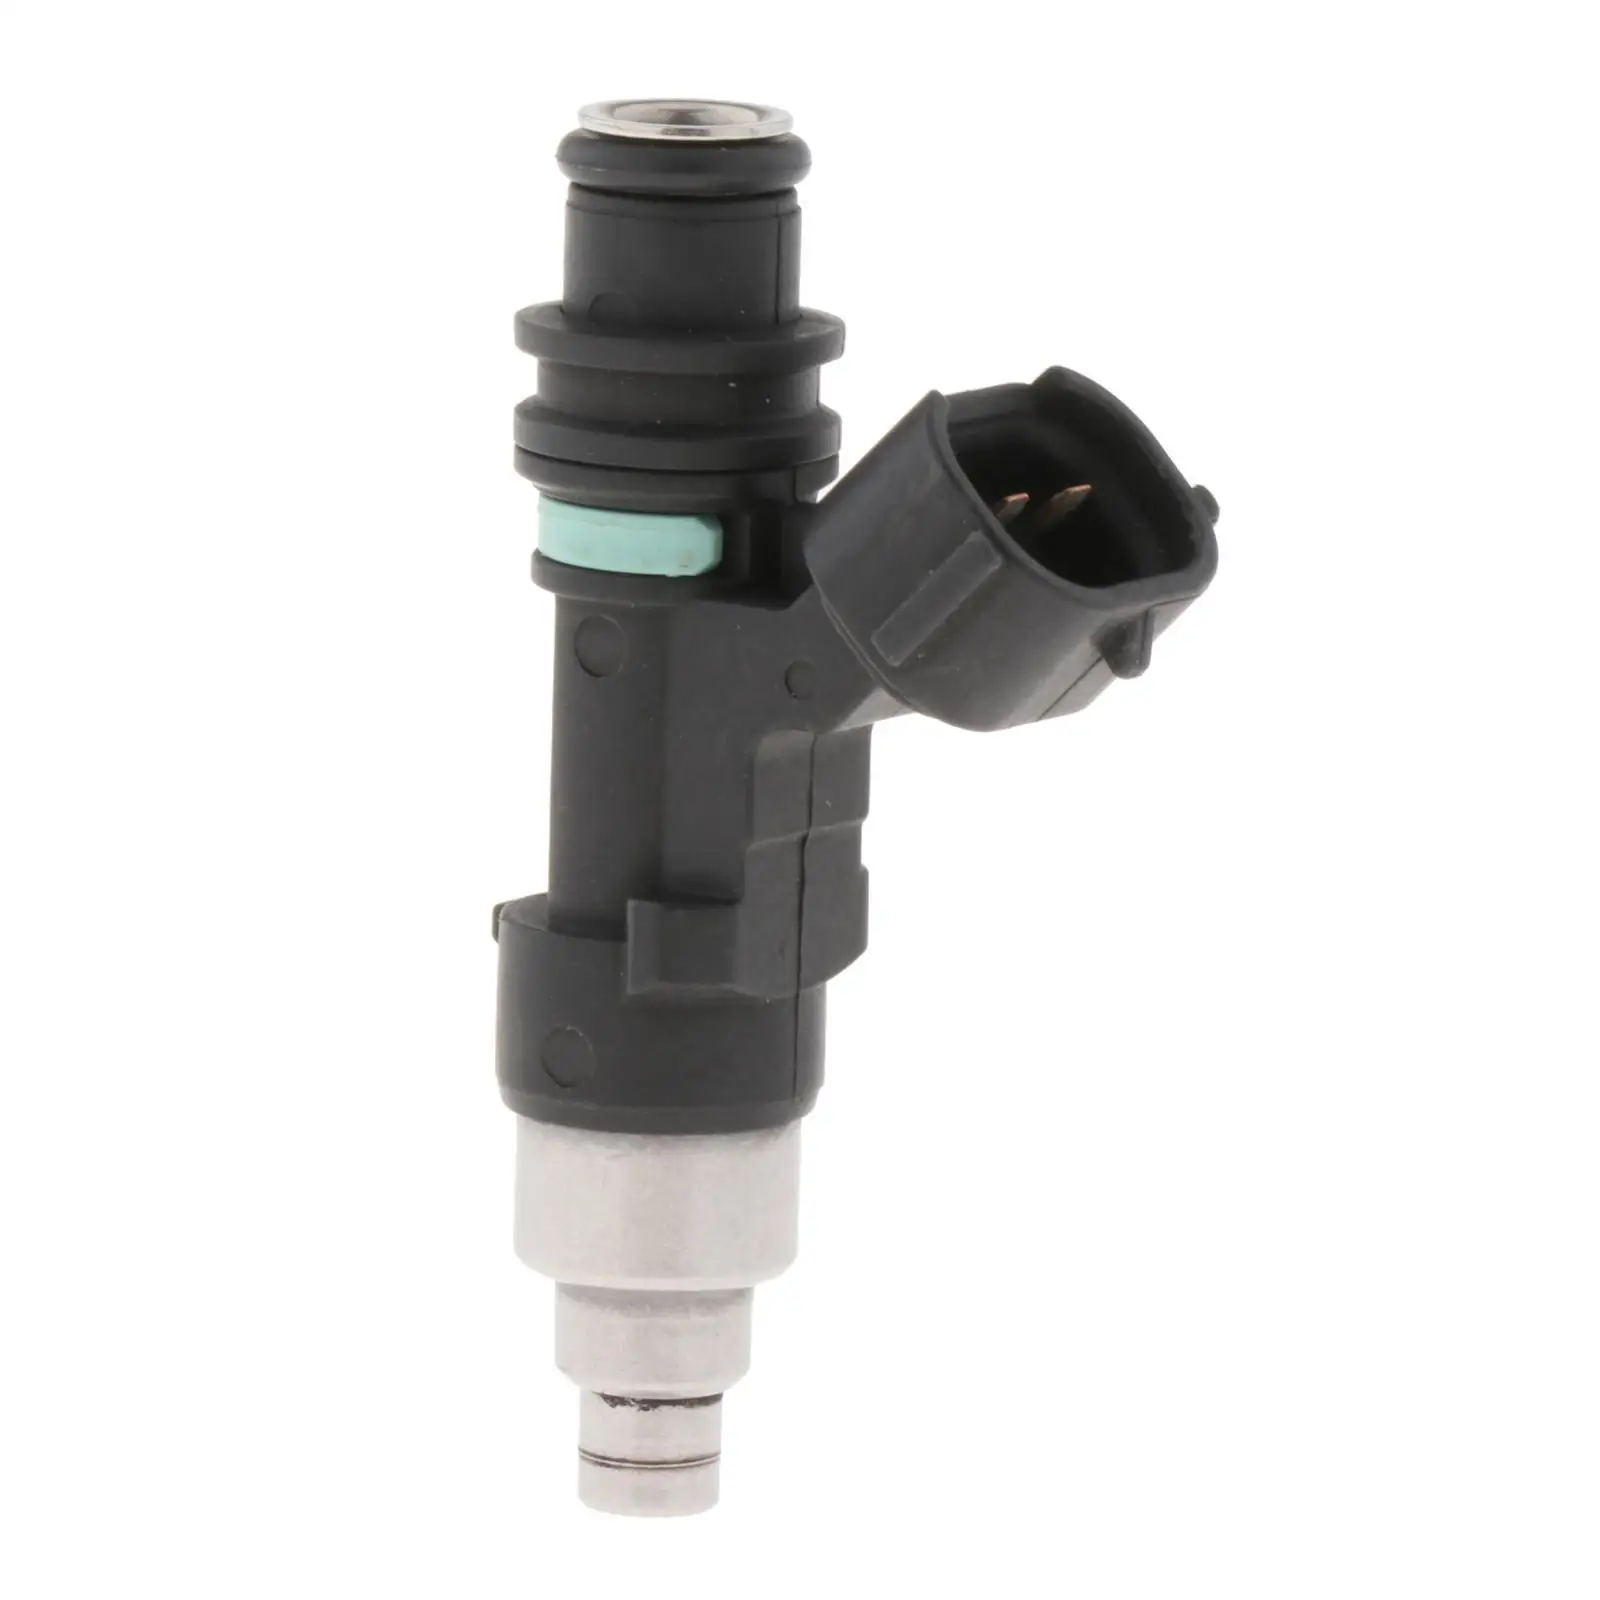 Fuel Injector Spare Parts Fits for Suzuki Outboard DF 90 2015 Boat Parts